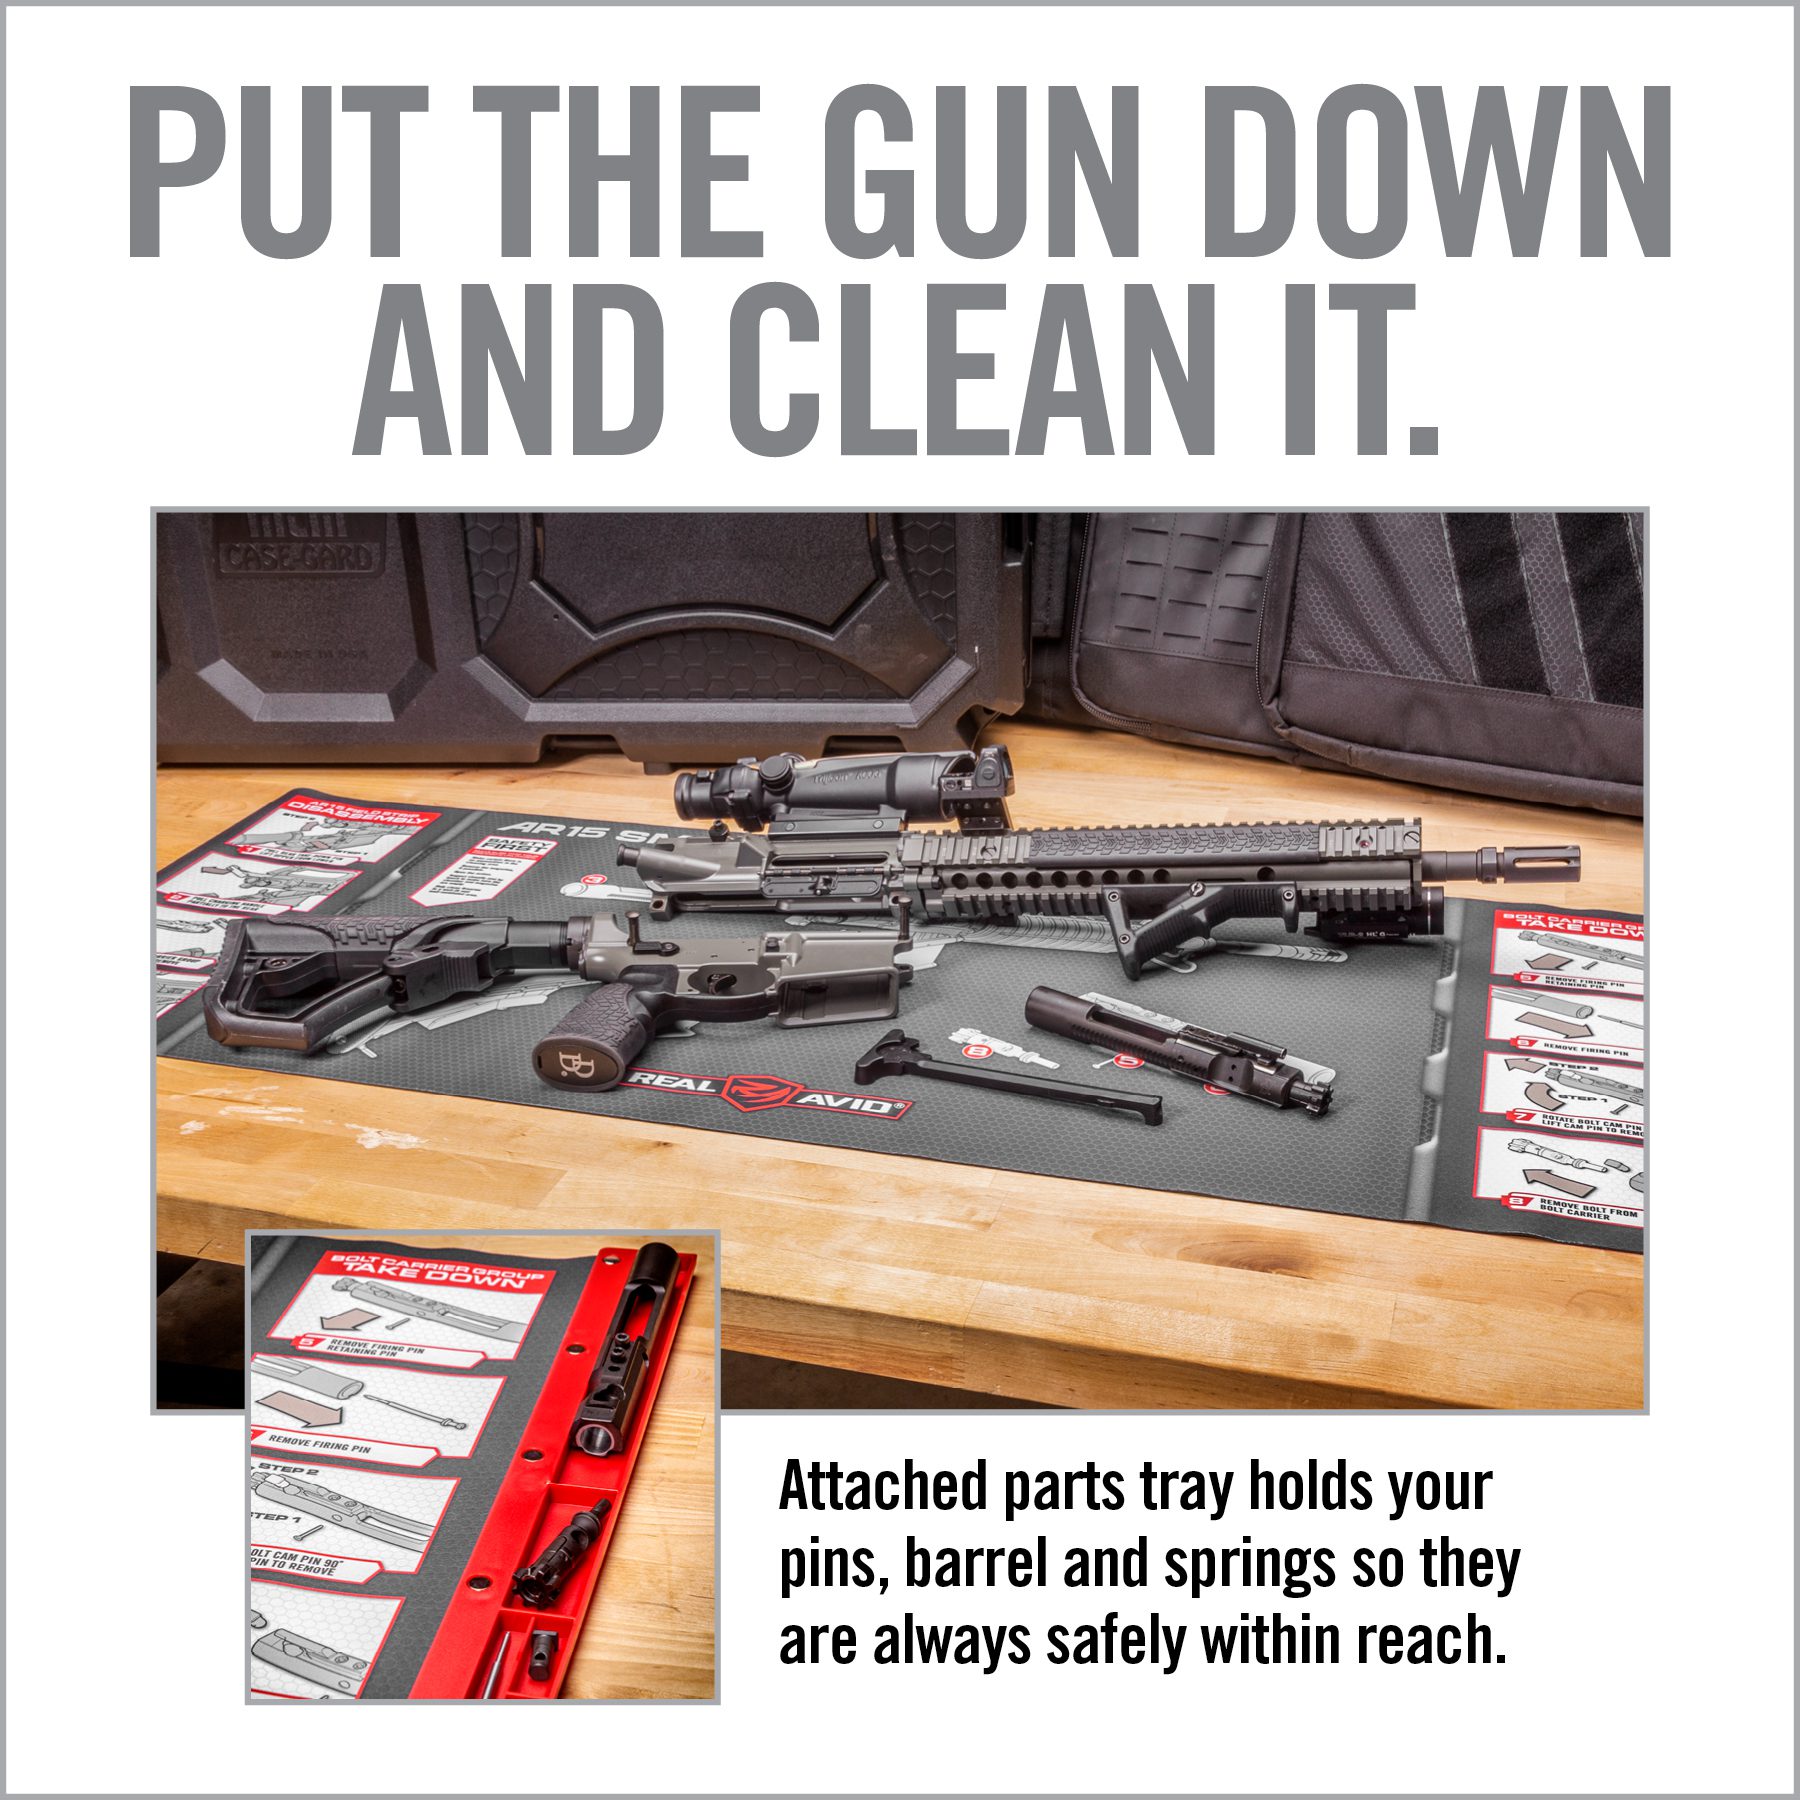 an advertisement for the gun down and clean it